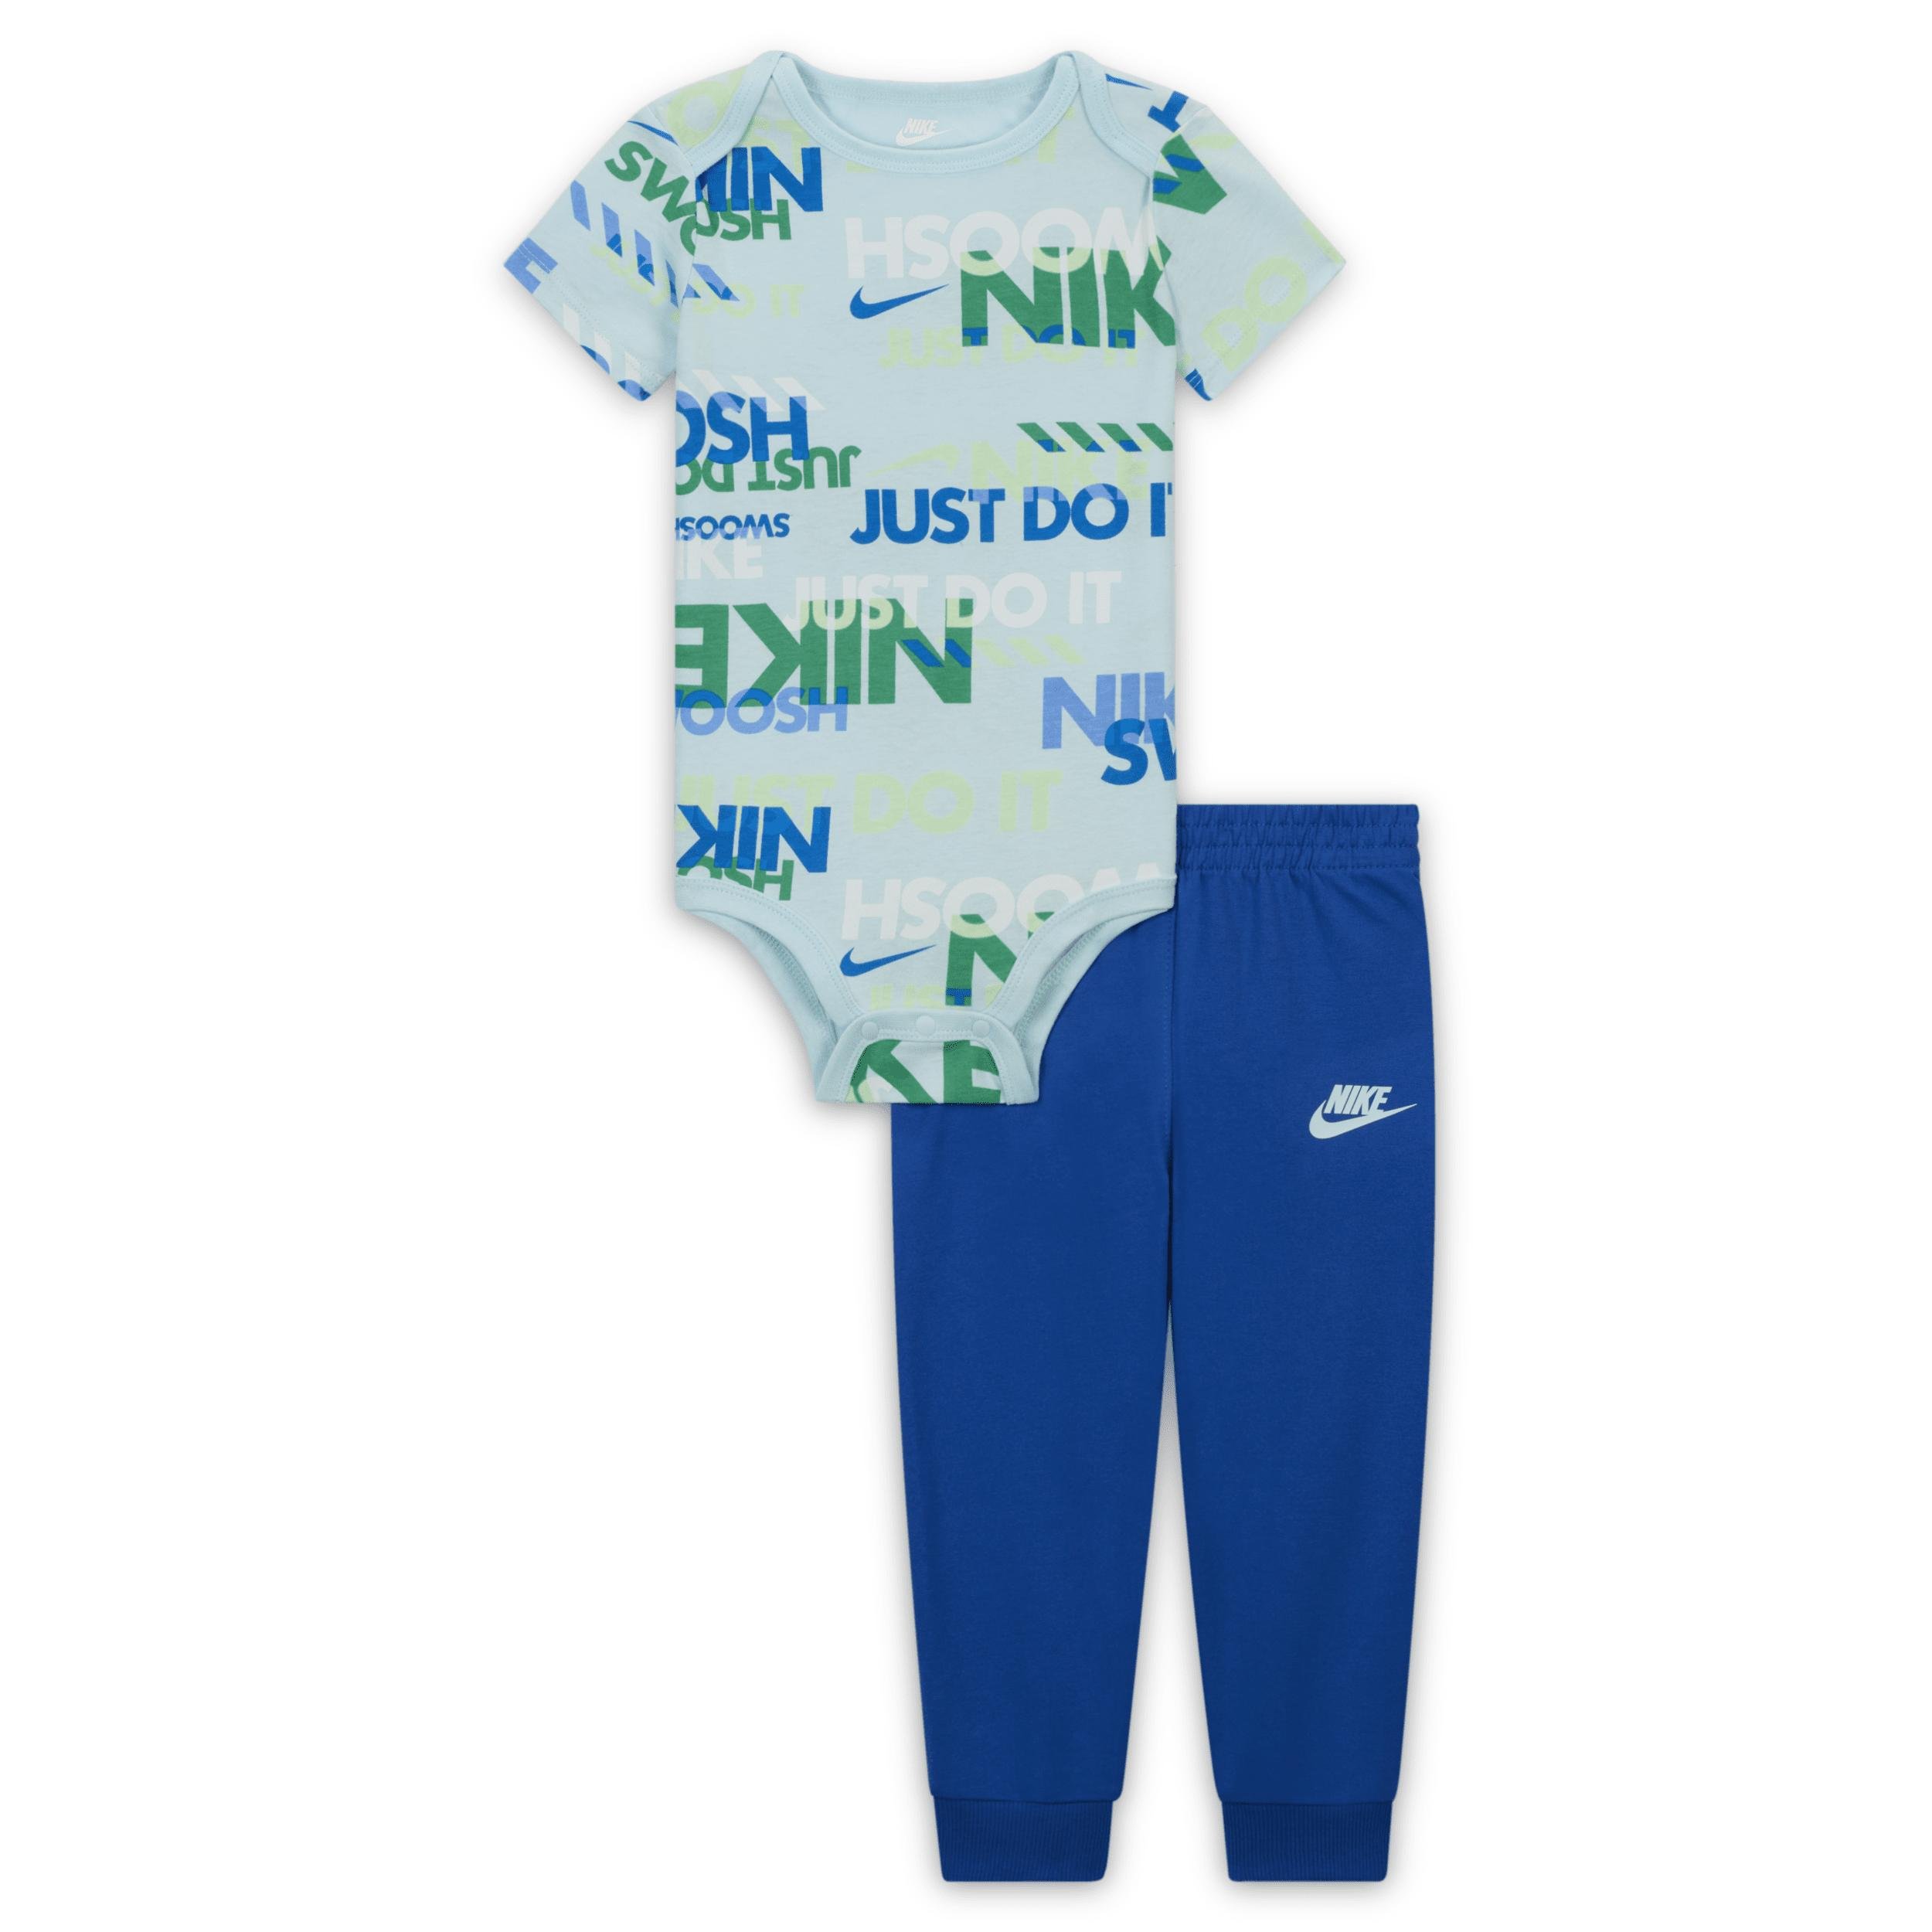 Nike Sportswear Playful Exploration Baby (12-24M) Printed Bodysuit and Pants Set by NIKE